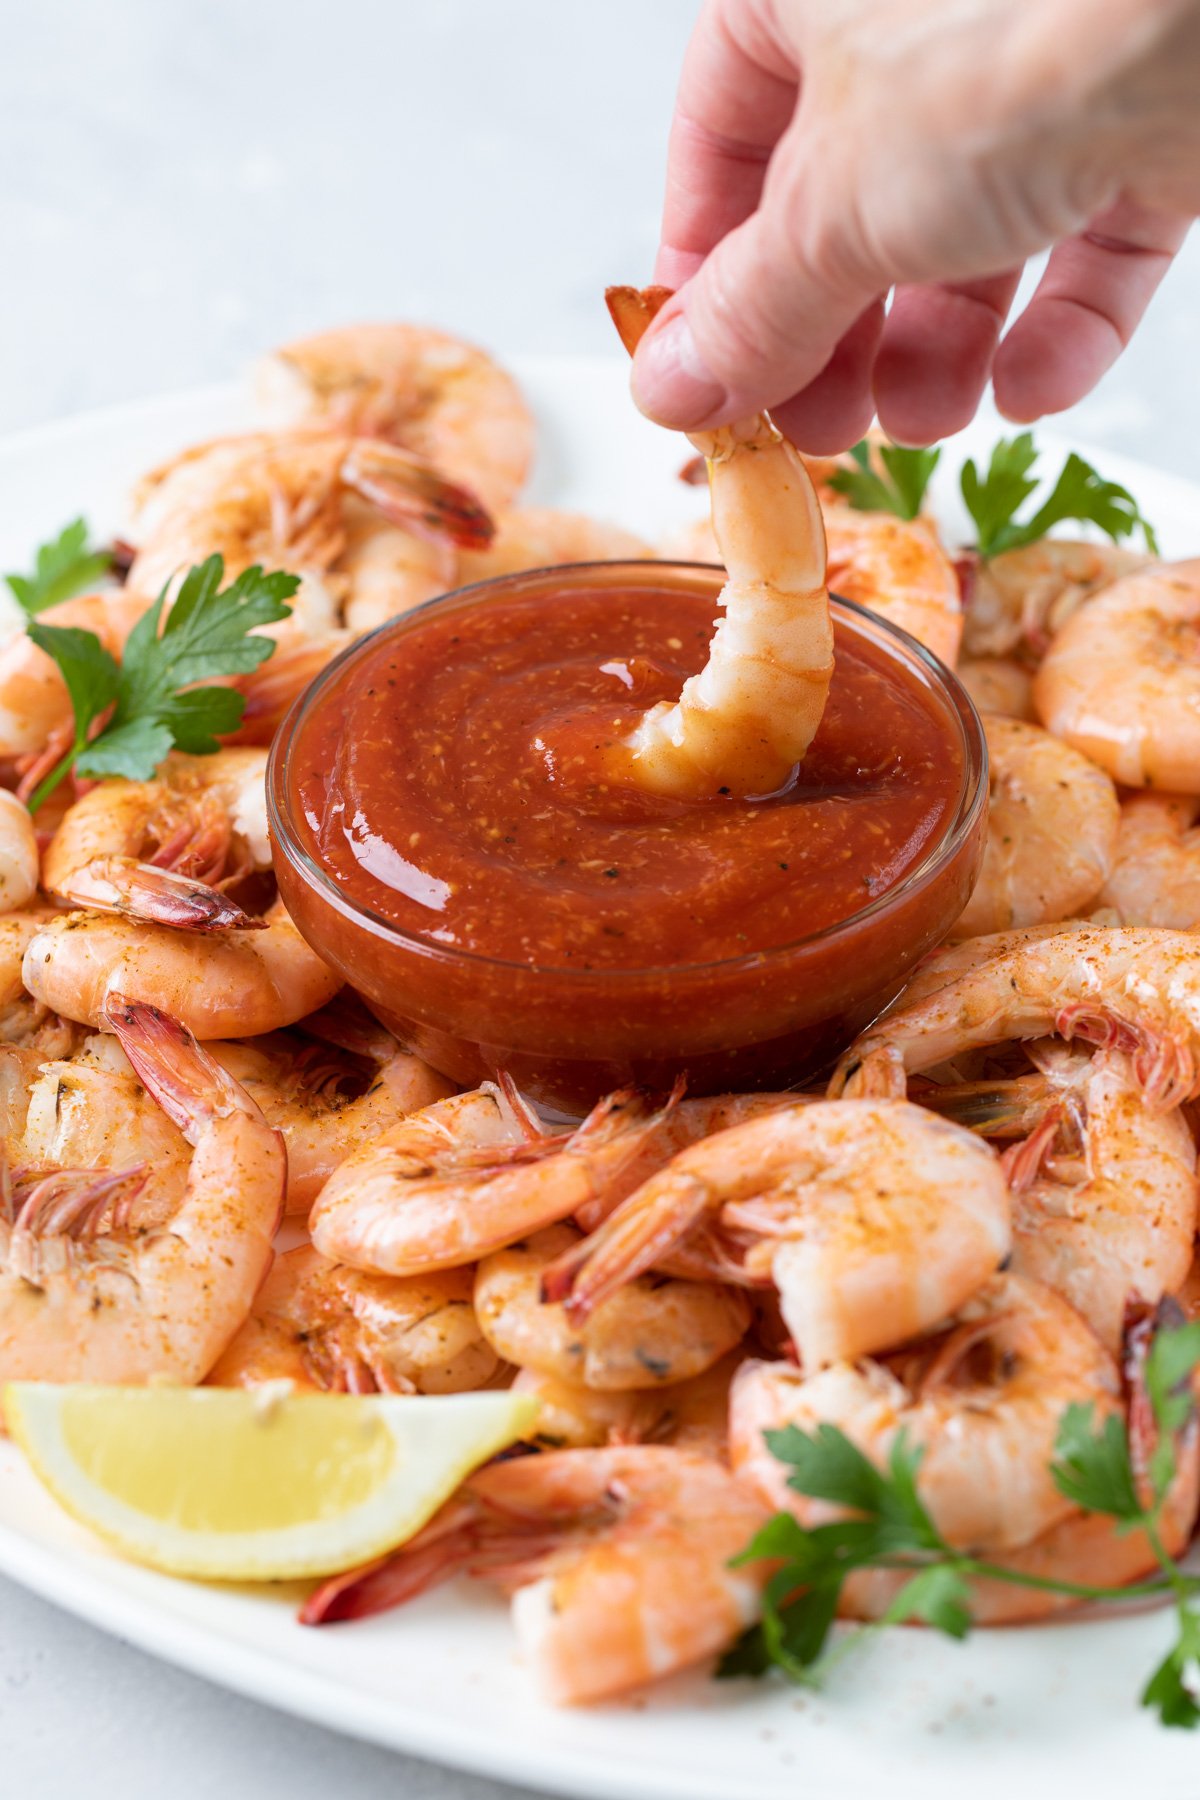 Dipping a shrimp into a bowl of cocktail sauce on a white platter with shrimp.